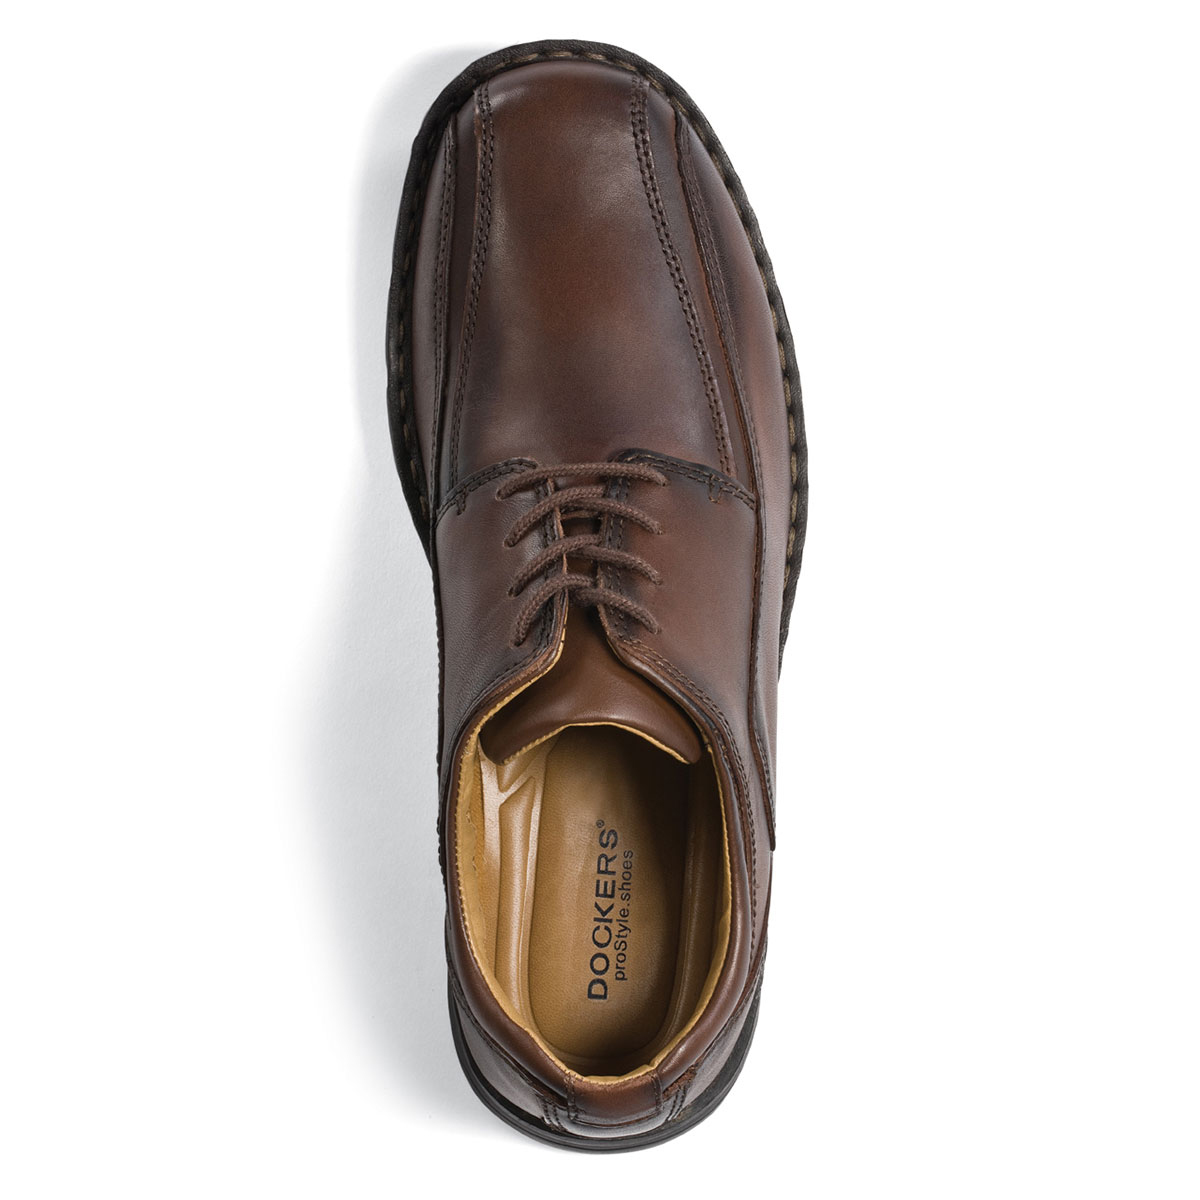 dockers prostyle shoes